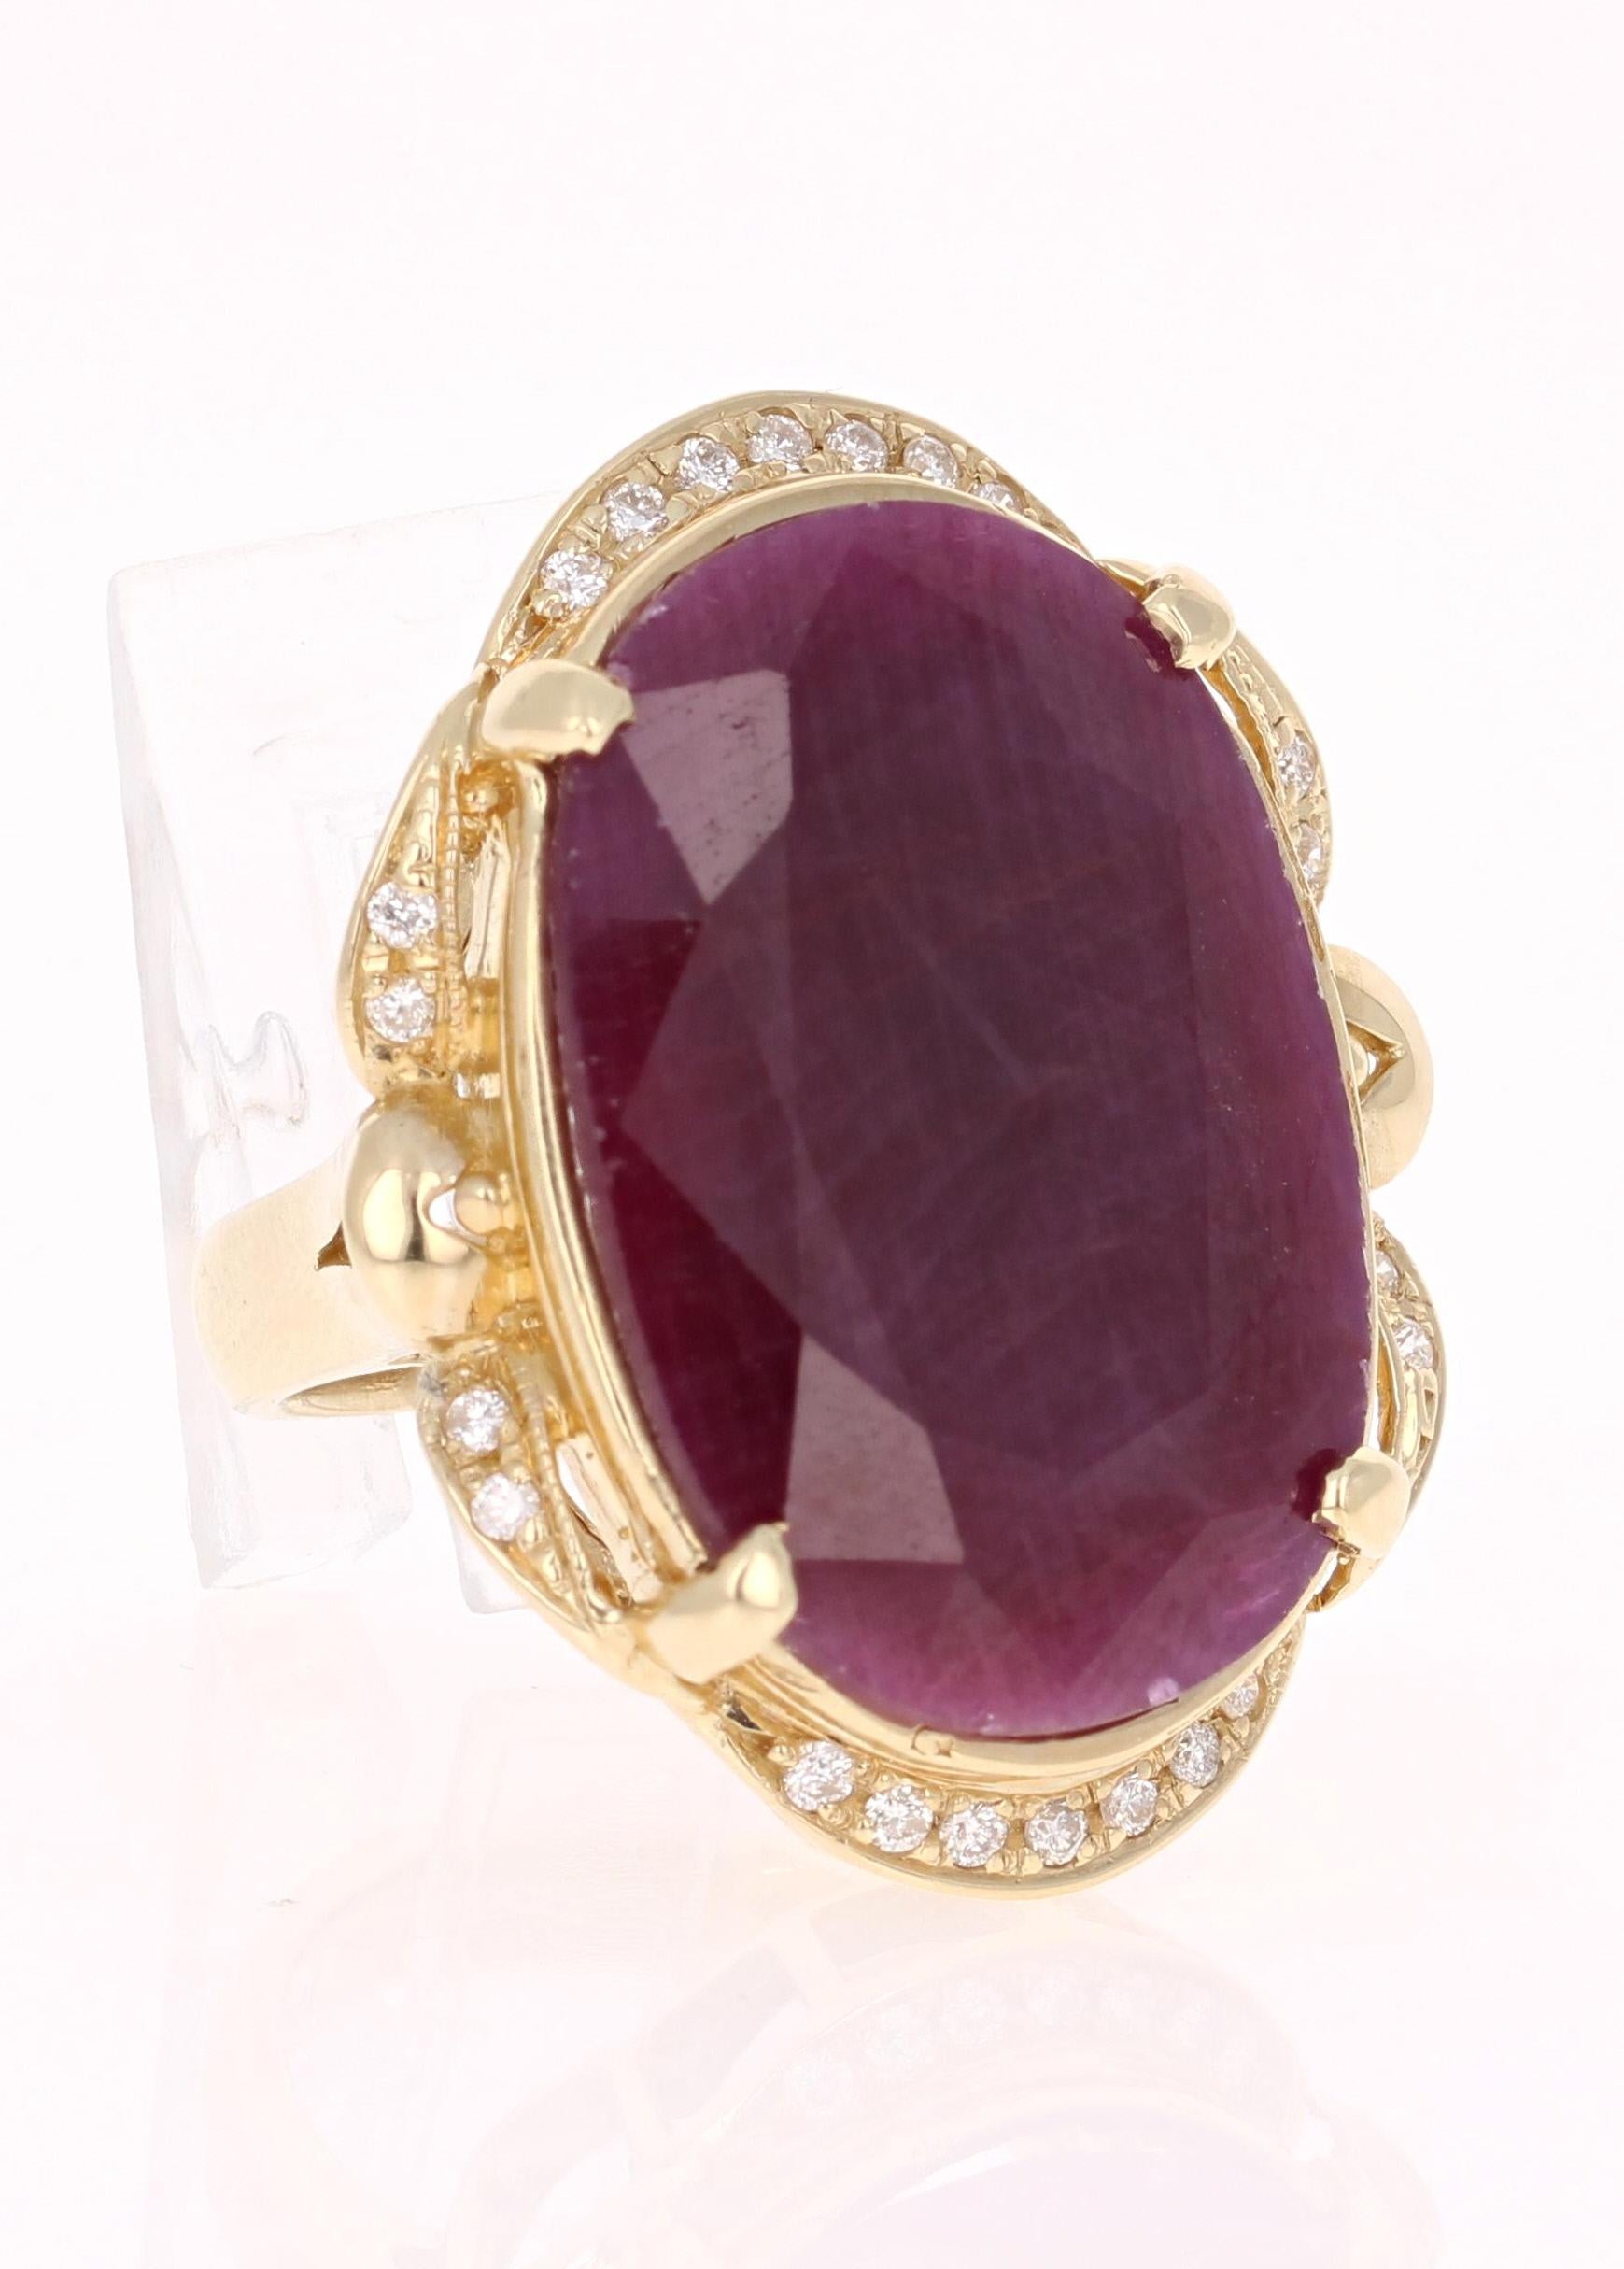 This ring is truly a one of a kind beauty!  
There is a large Oval Cut Ruby set in the center of the ring that weighs 25.31 carats.  
It is surrounded by 23 Round Cut Diamonds that weigh 0.28 carats.  
The total carat weight of the ring is 25.59